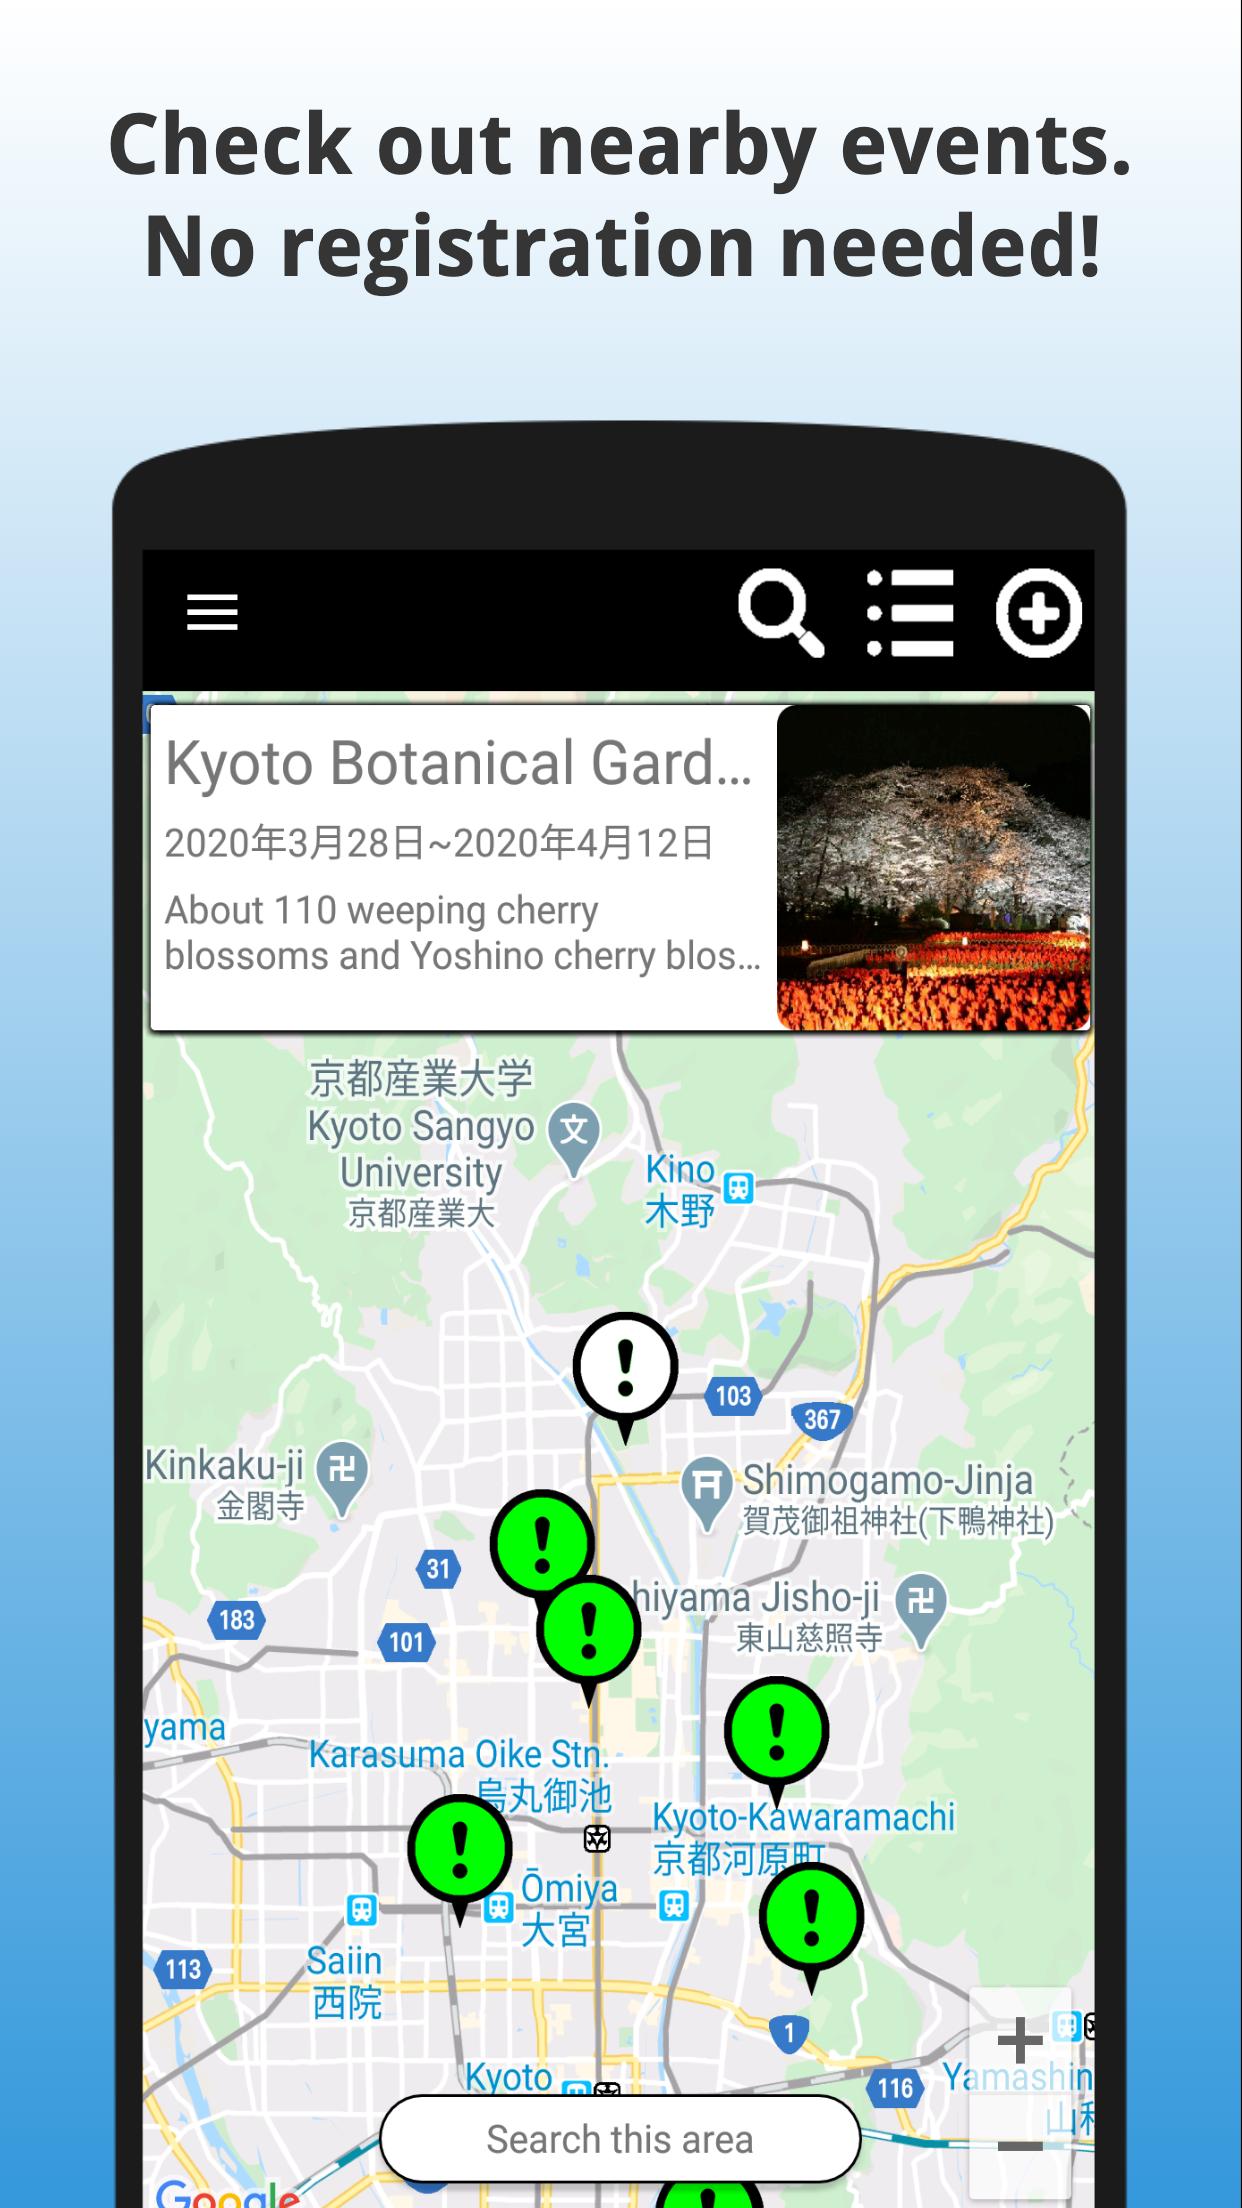 EVENTA - Search & Post Events Near You in Japan 1.0.15 Screenshot 1